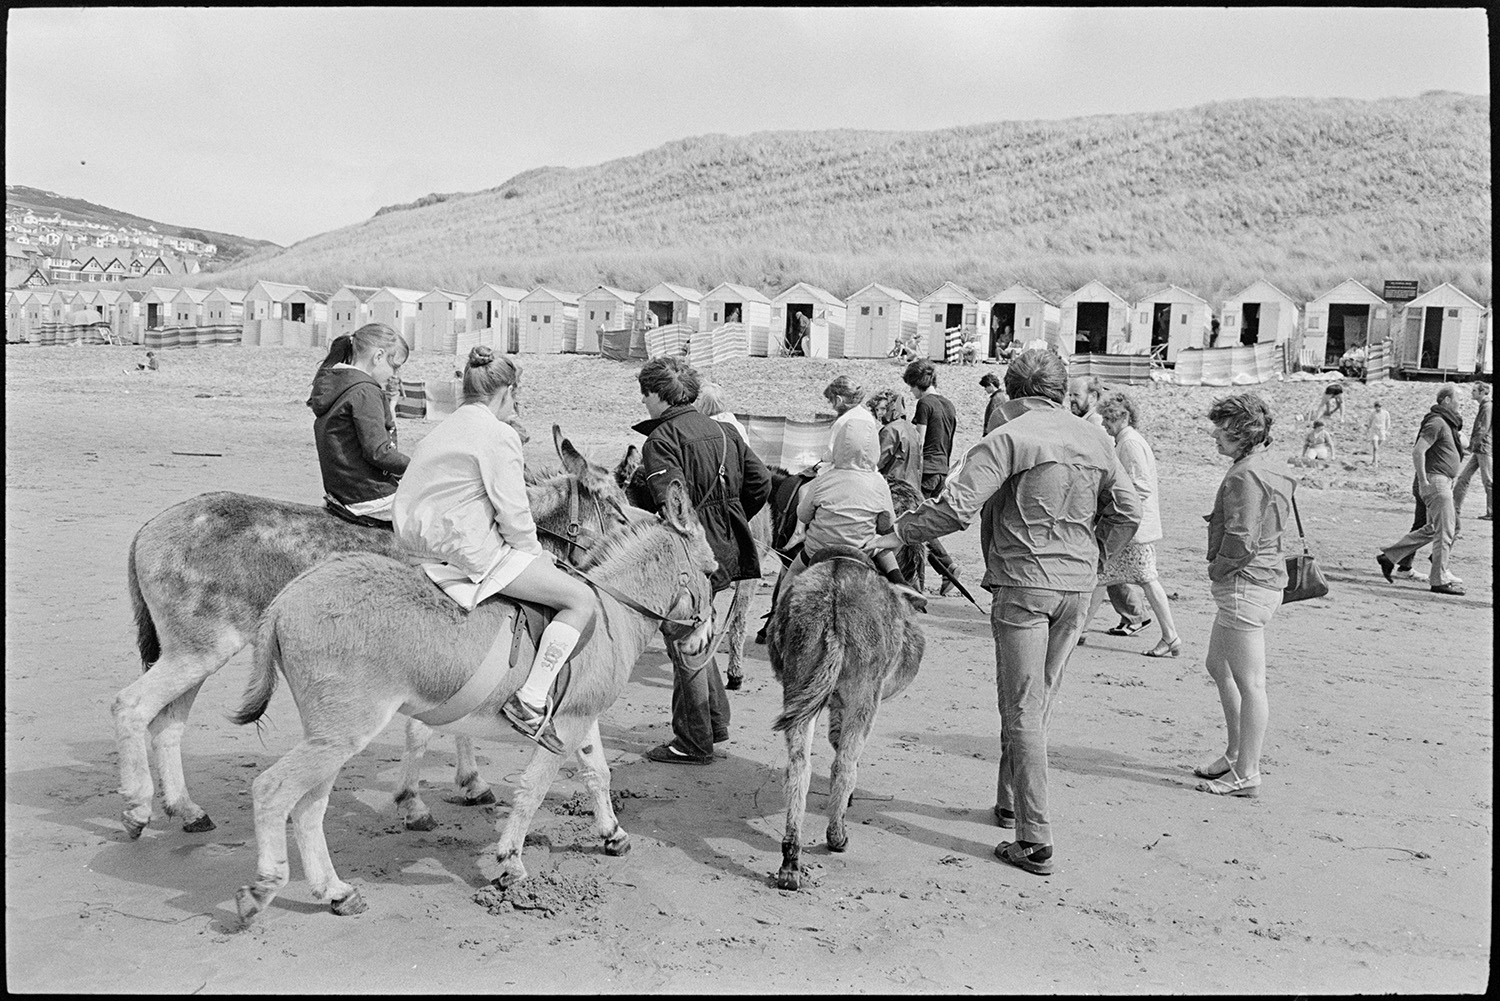 Beach scenes with donkey rides, bathing huts, people swimming.
[Children having donkey rides on Woolacombe beach. Sand dunes, holidaymakers and beach huts are visible in the background.]